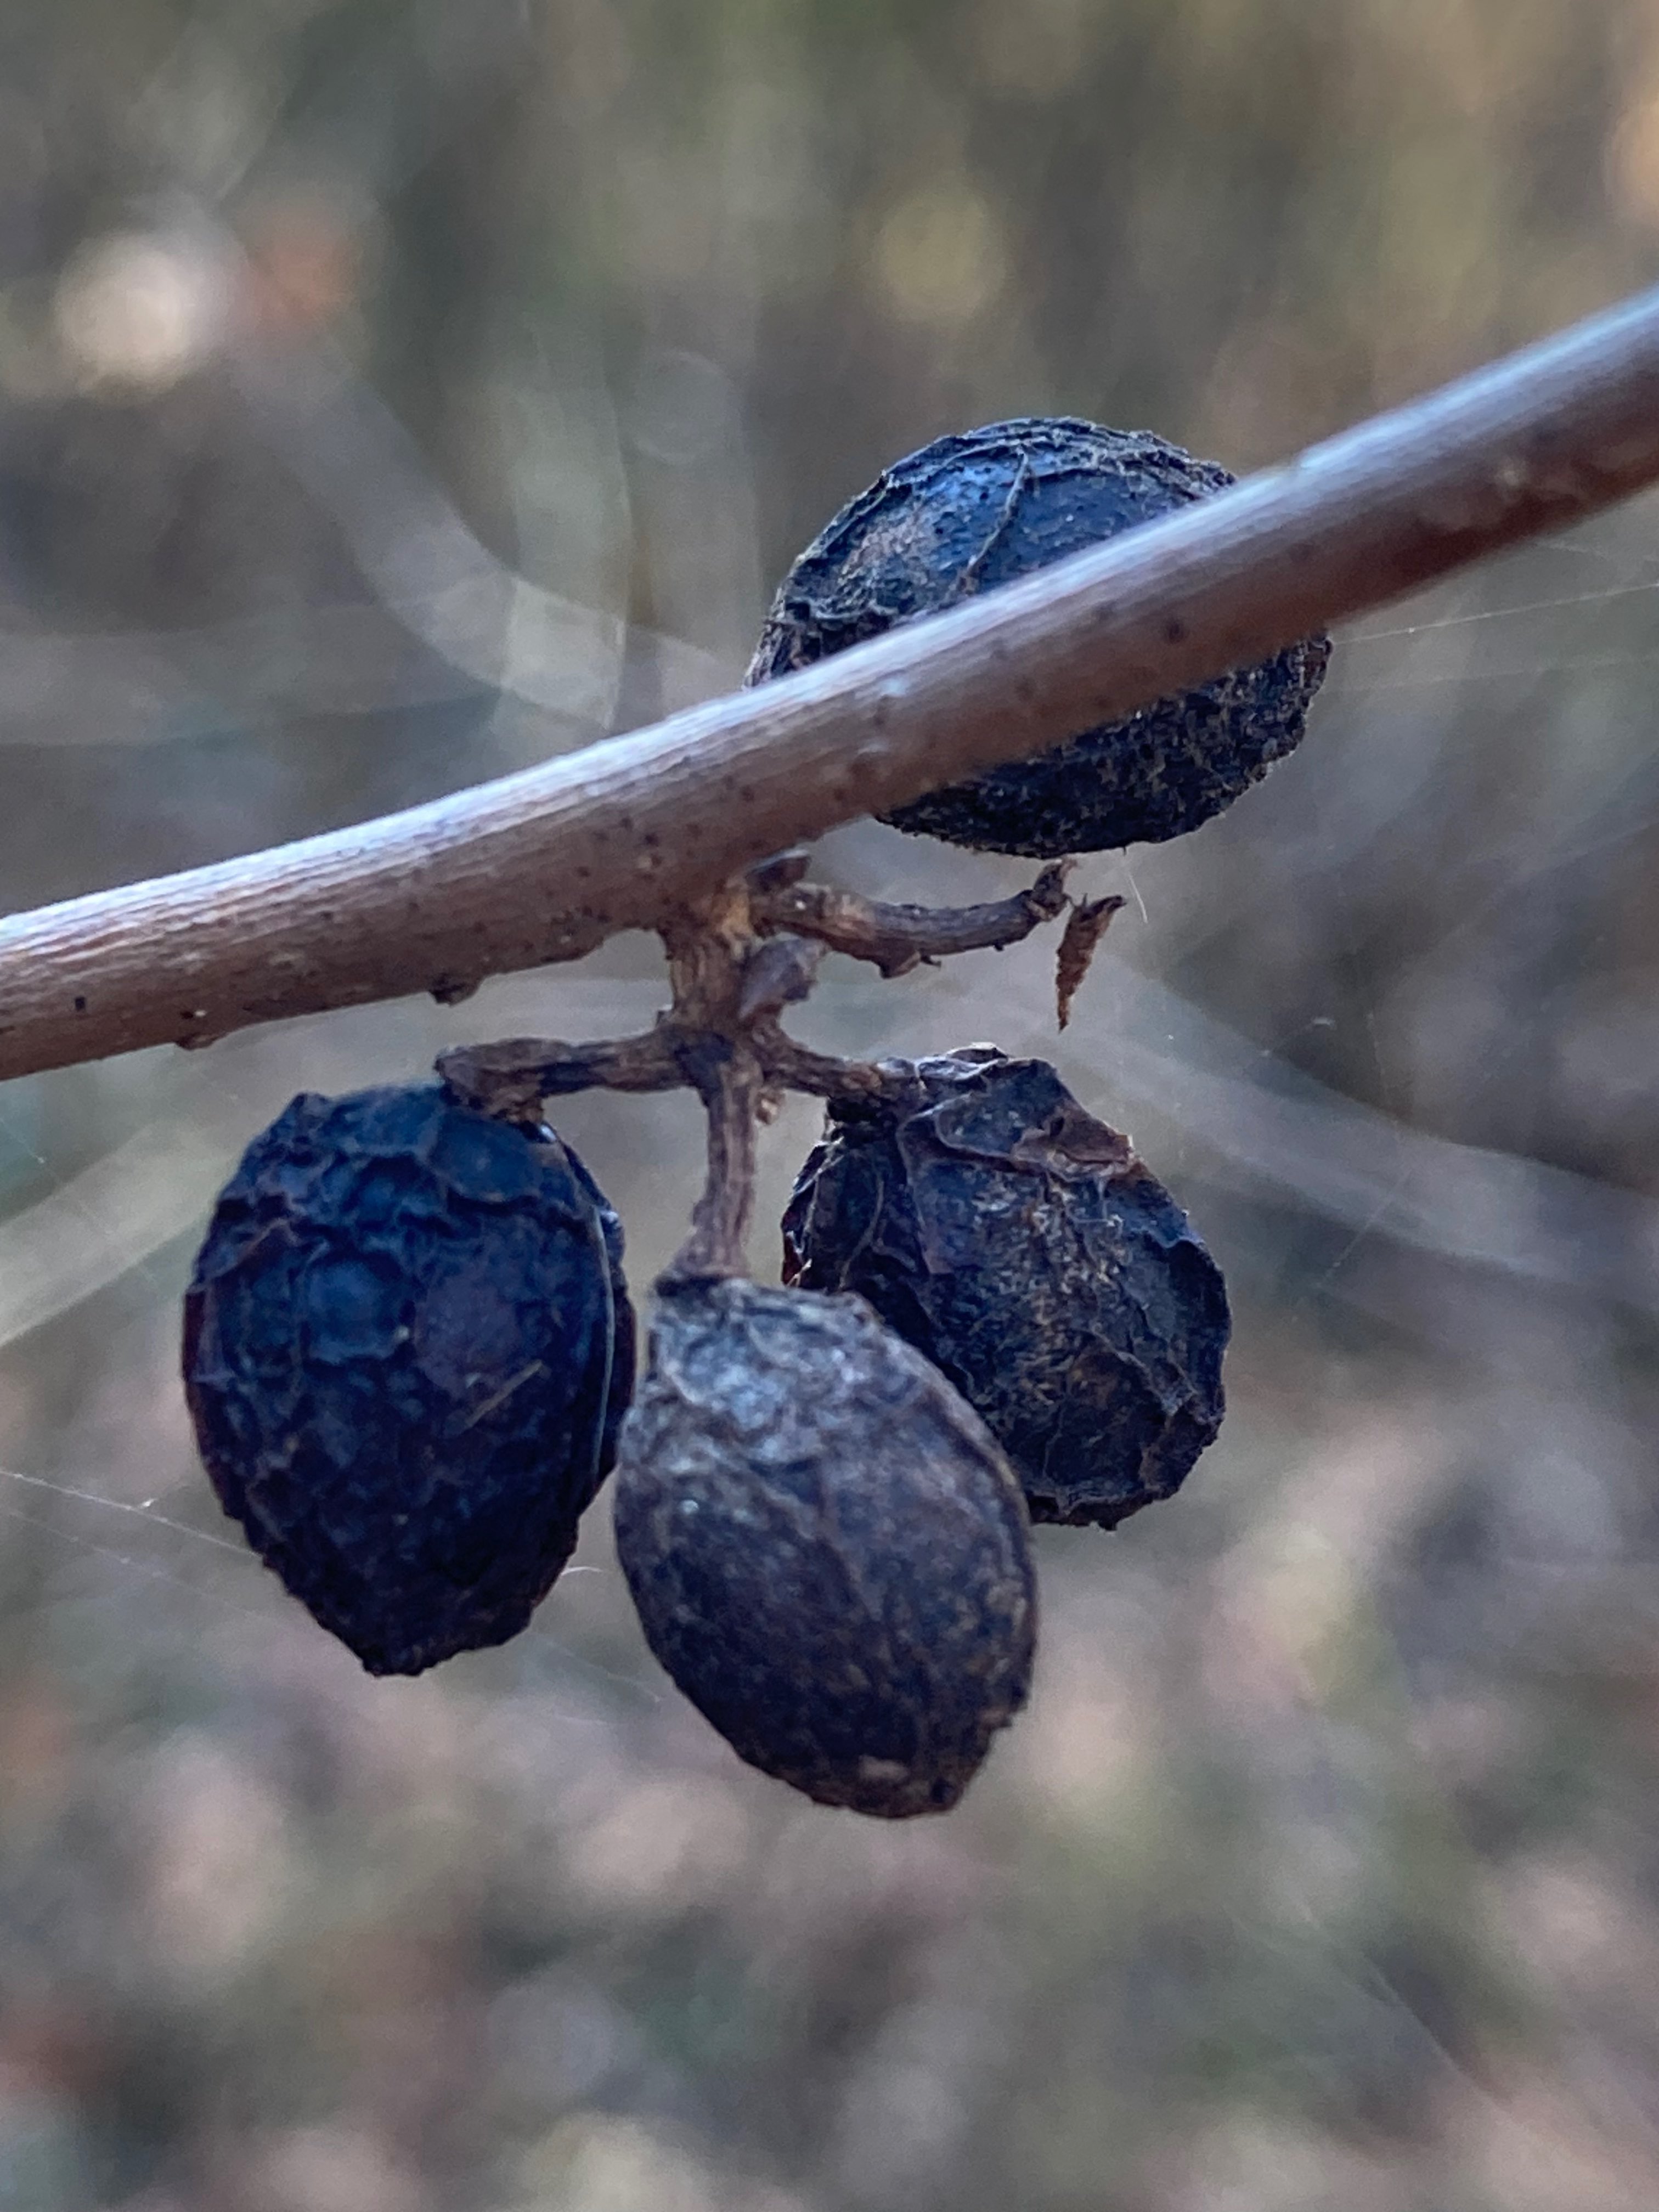 The Scientific Name is Lindera benzoin. You will likely hear them called Northern Spicebush. This picture shows the Uneaten dried drupes. of Lindera benzoin